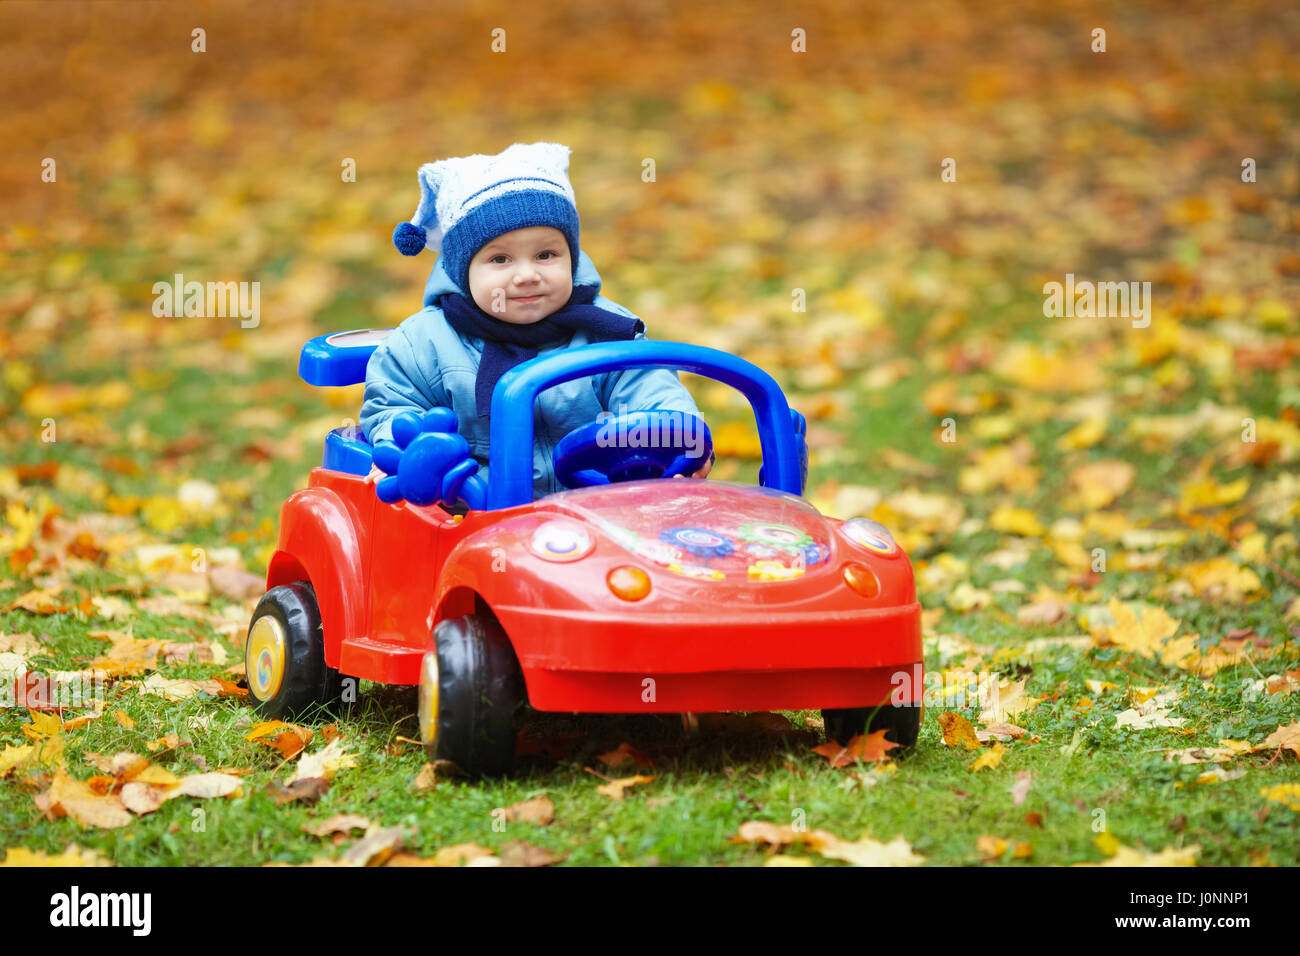 kid in toy car